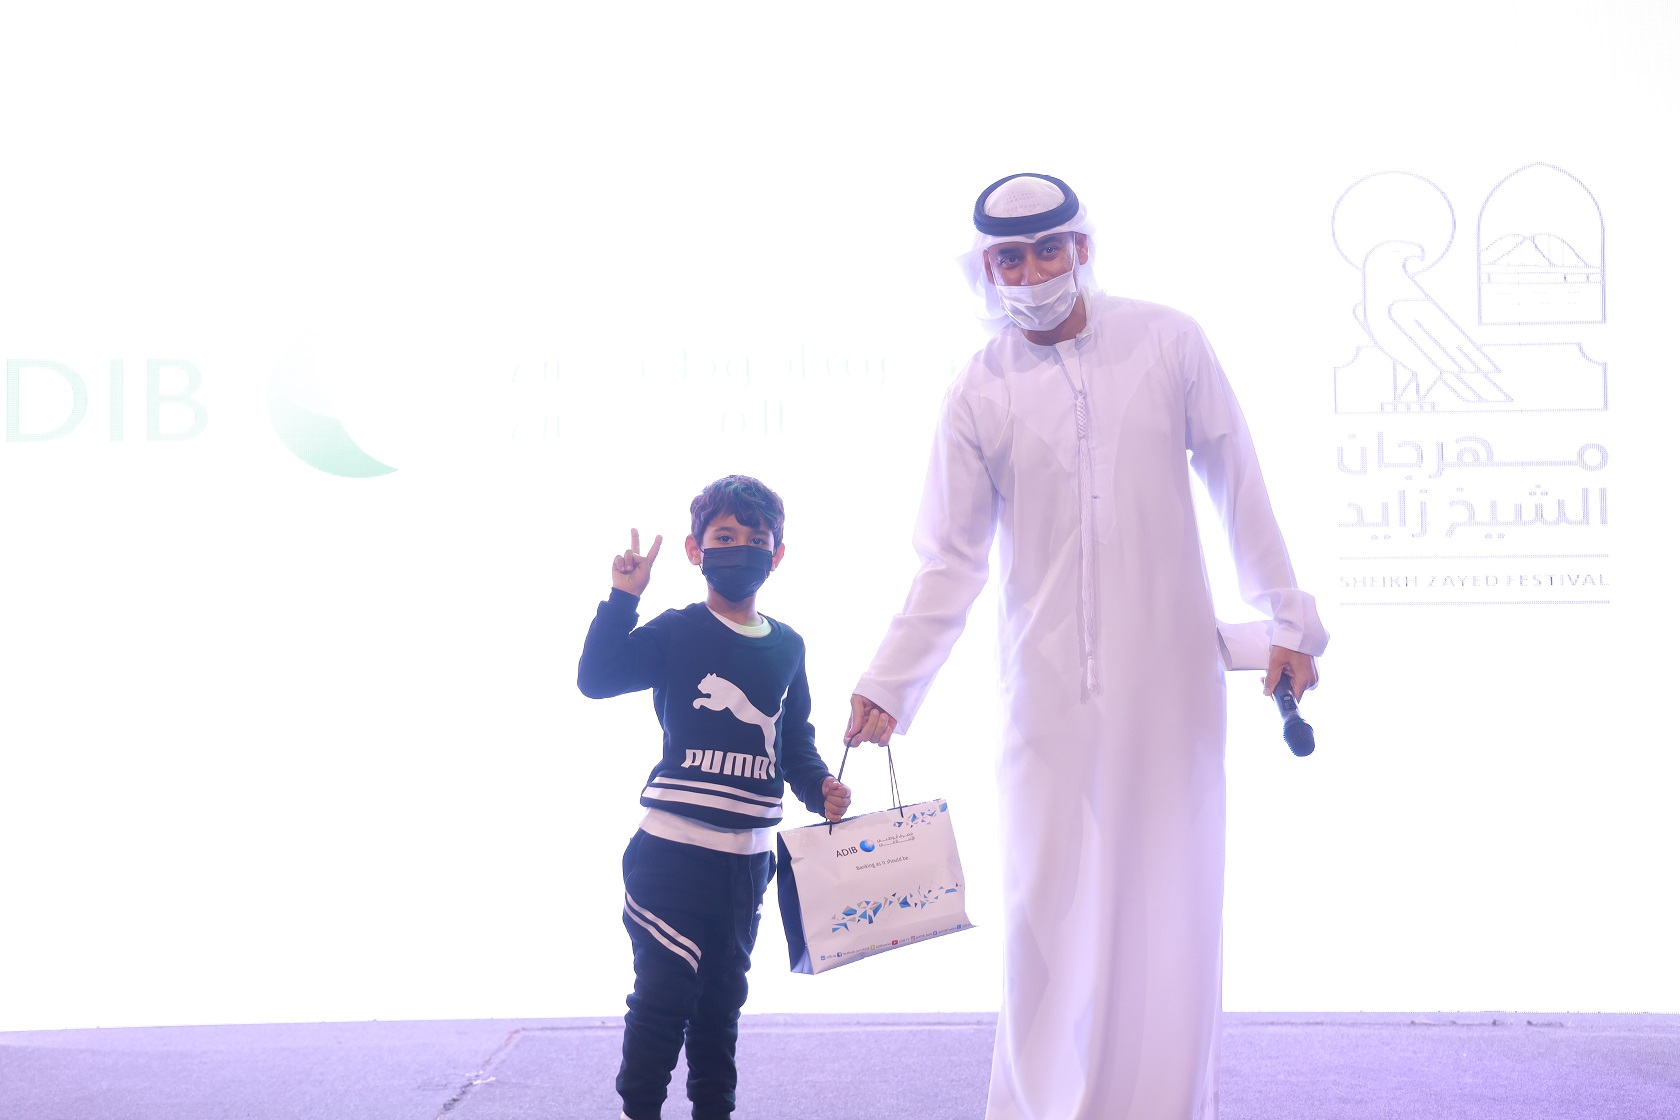 ADIB Organizes A Variety Of Fun Children’s Events And Competitions At The Sheikh Zayed Festival